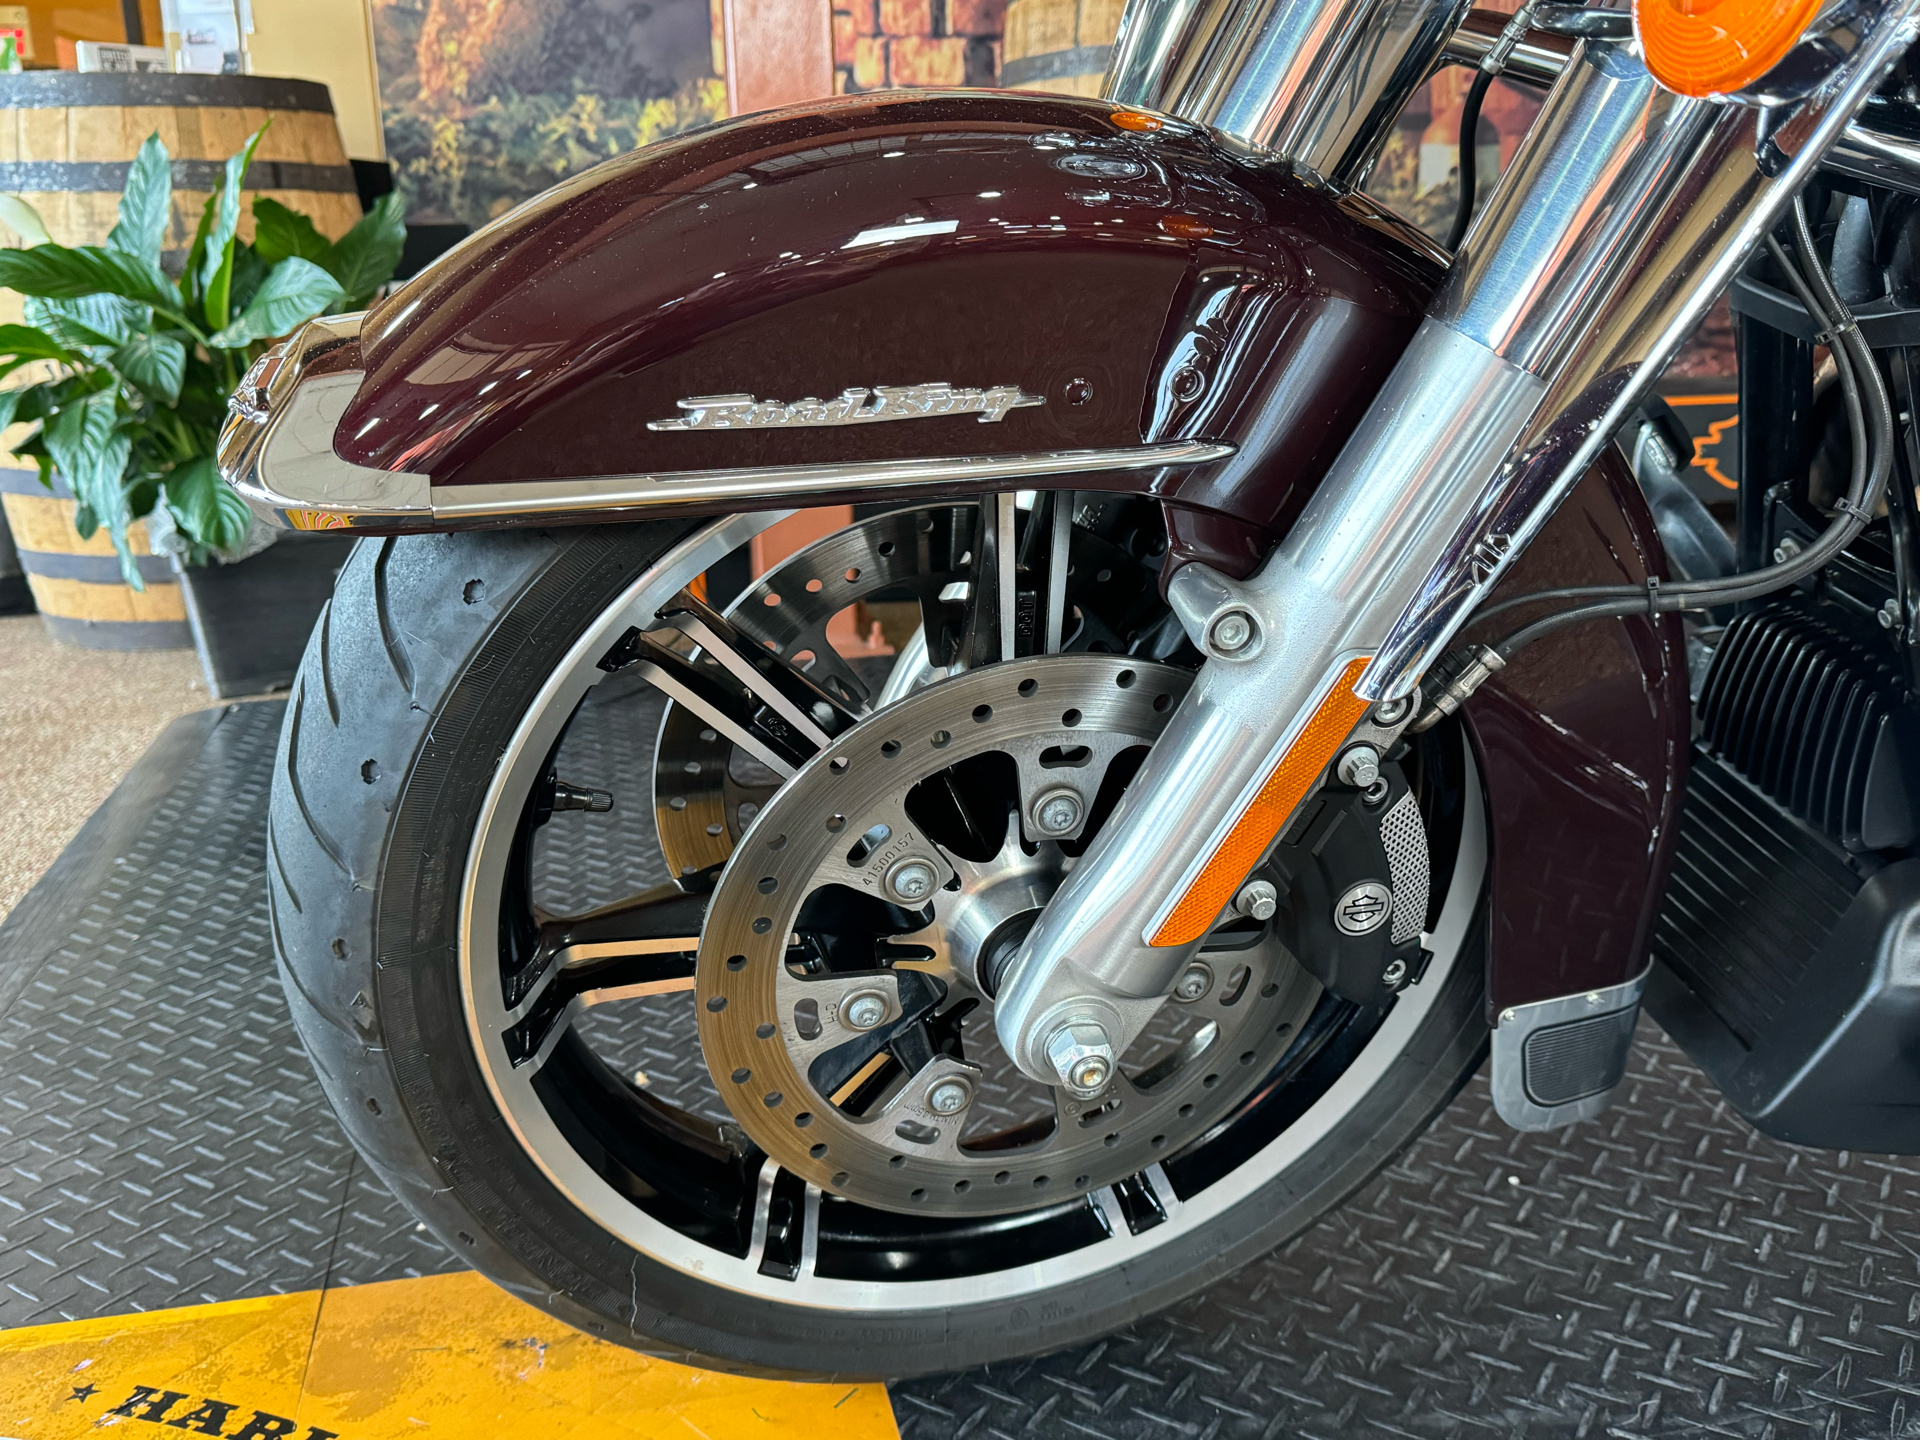 2021 Harley-Davidson Road King® in Knoxville, Tennessee - Photo 20